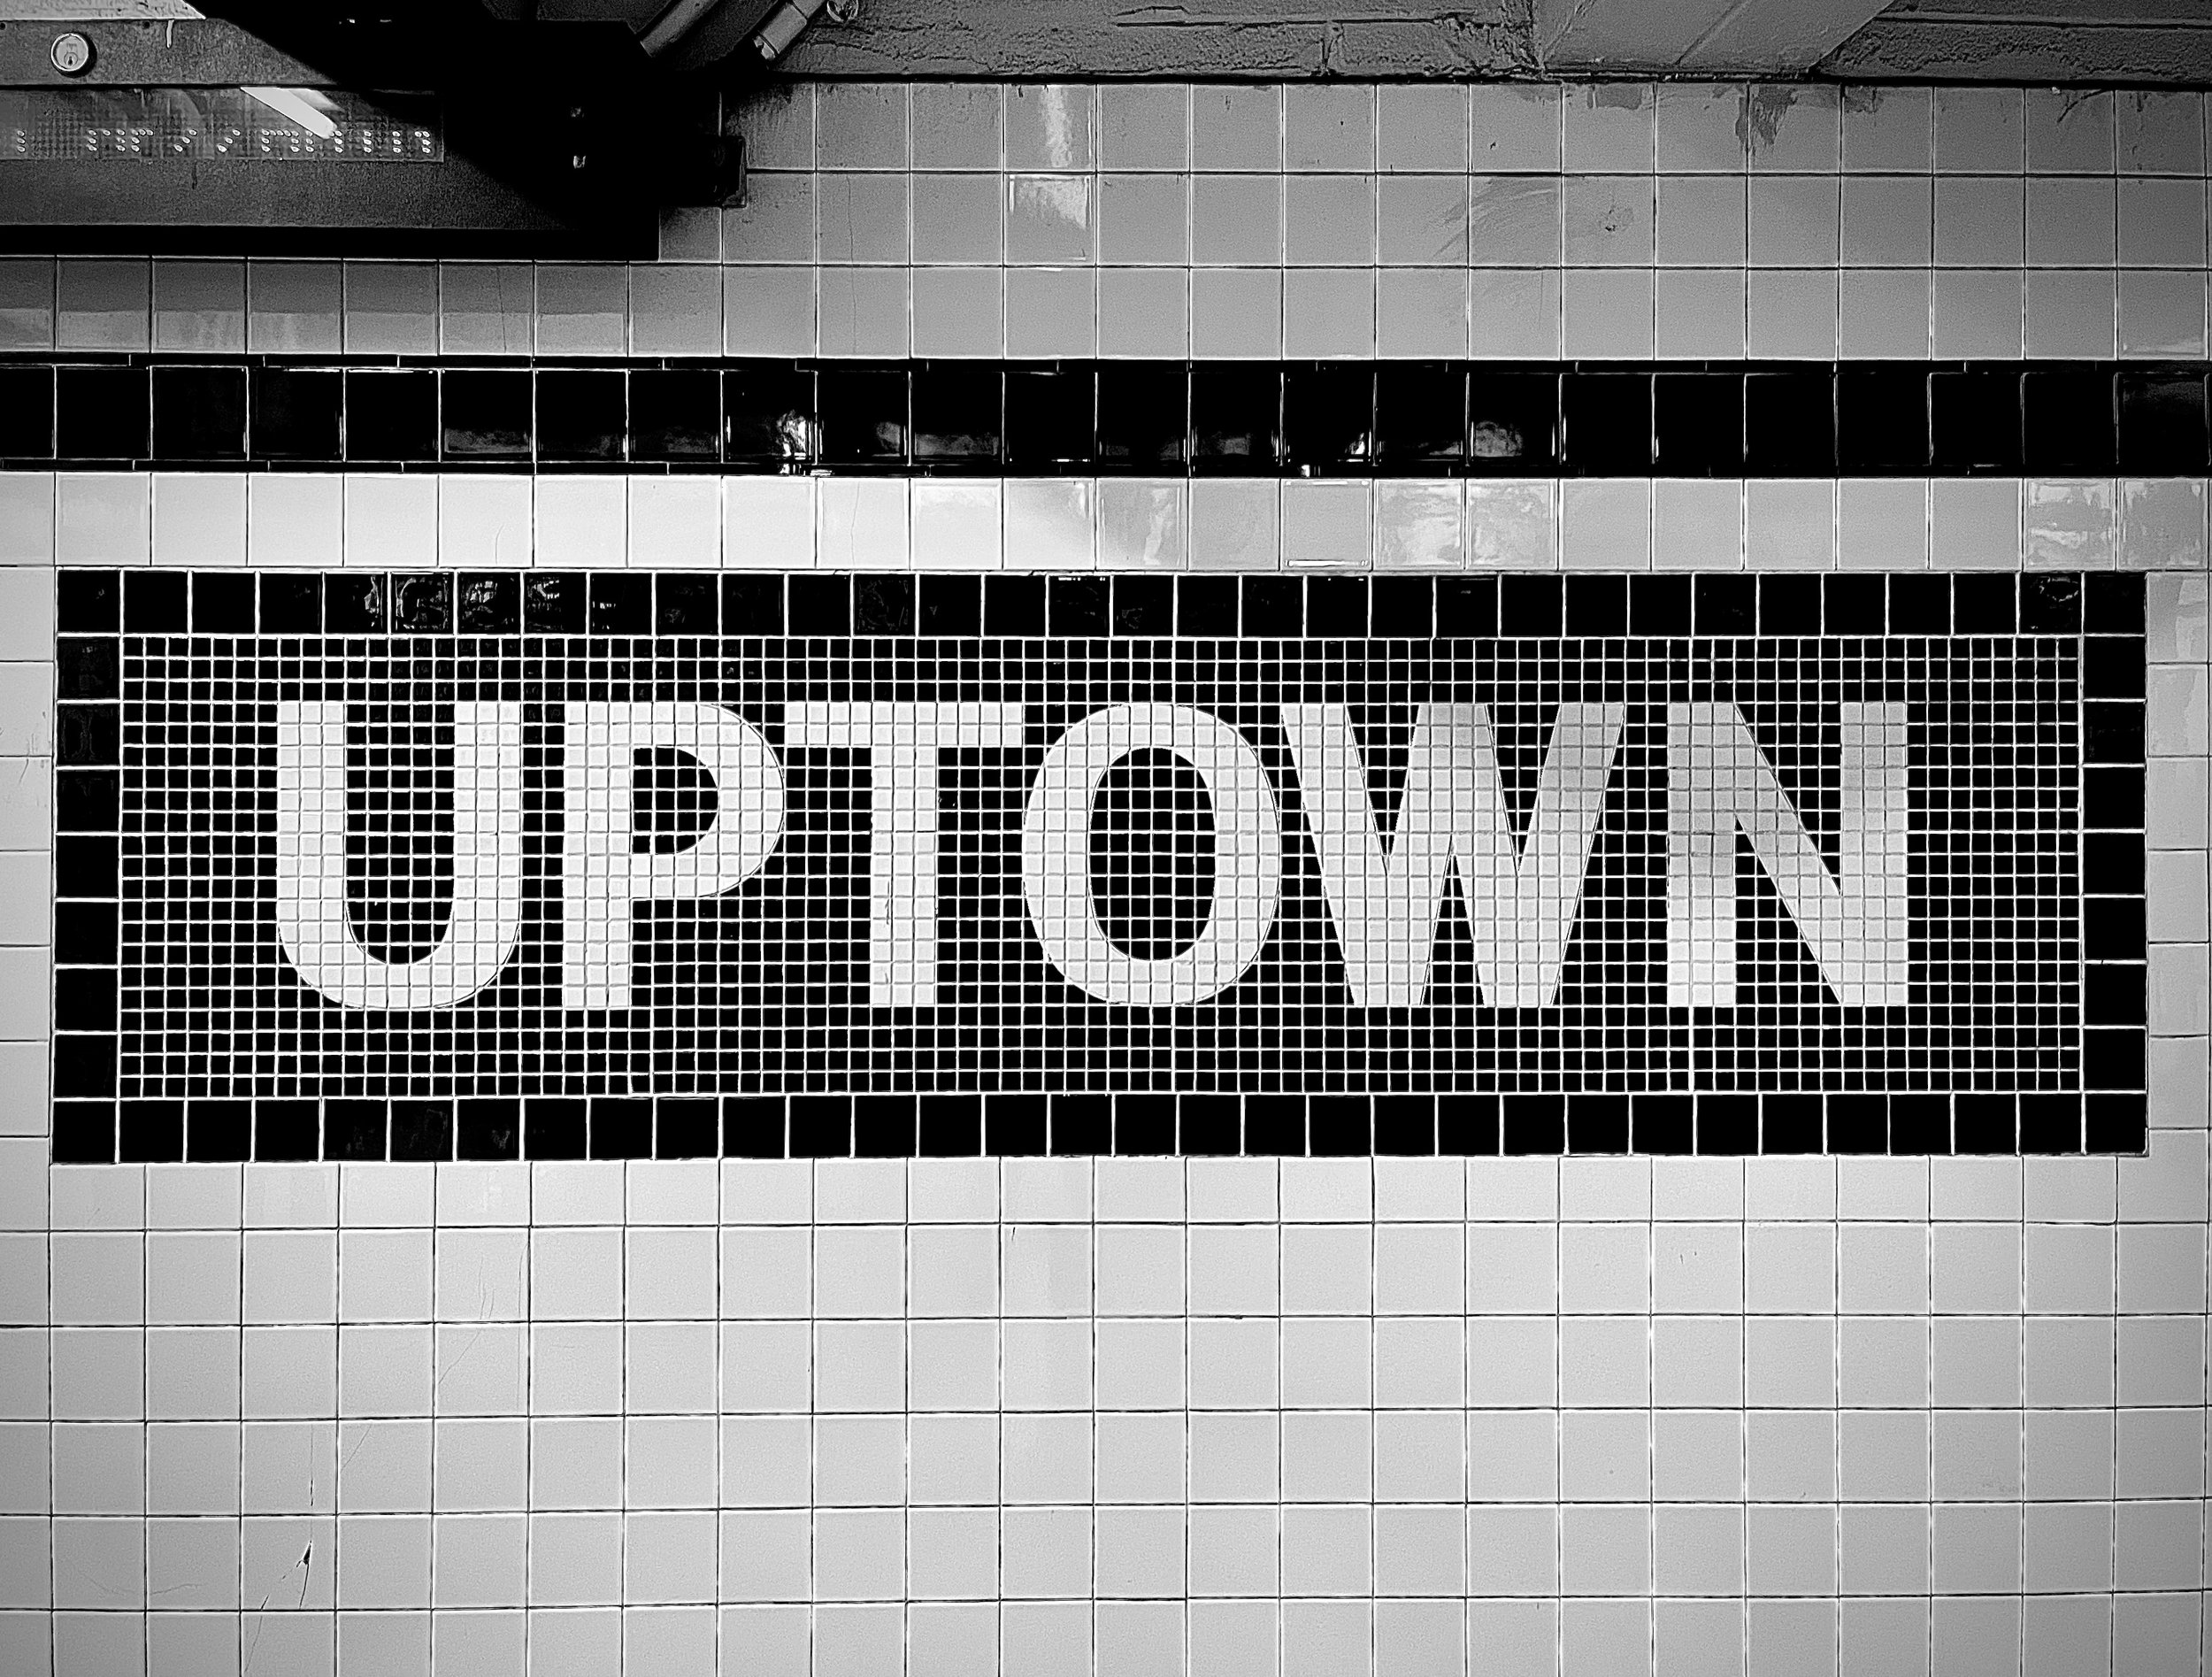 Uptown mural in the subway